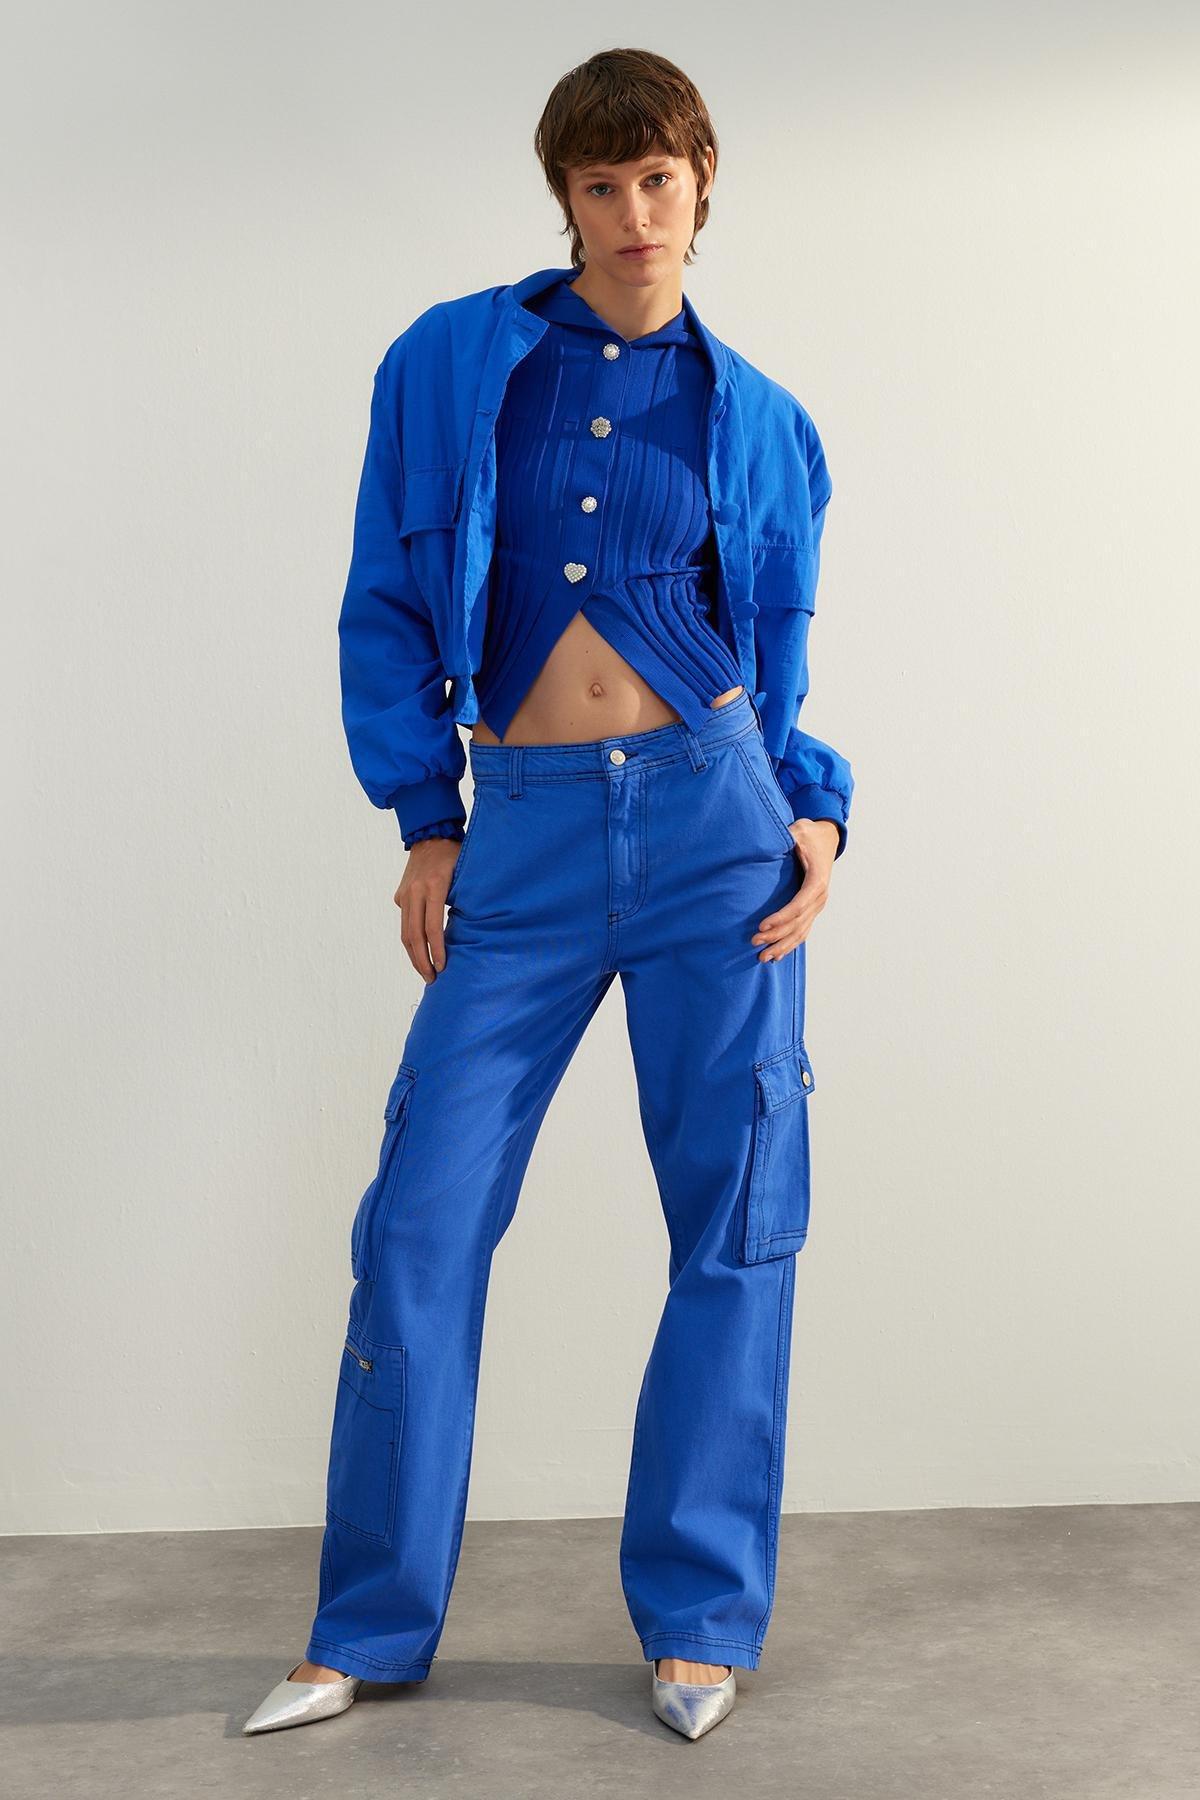 Trendyol - Blue Limited Edition High Waist Jeans